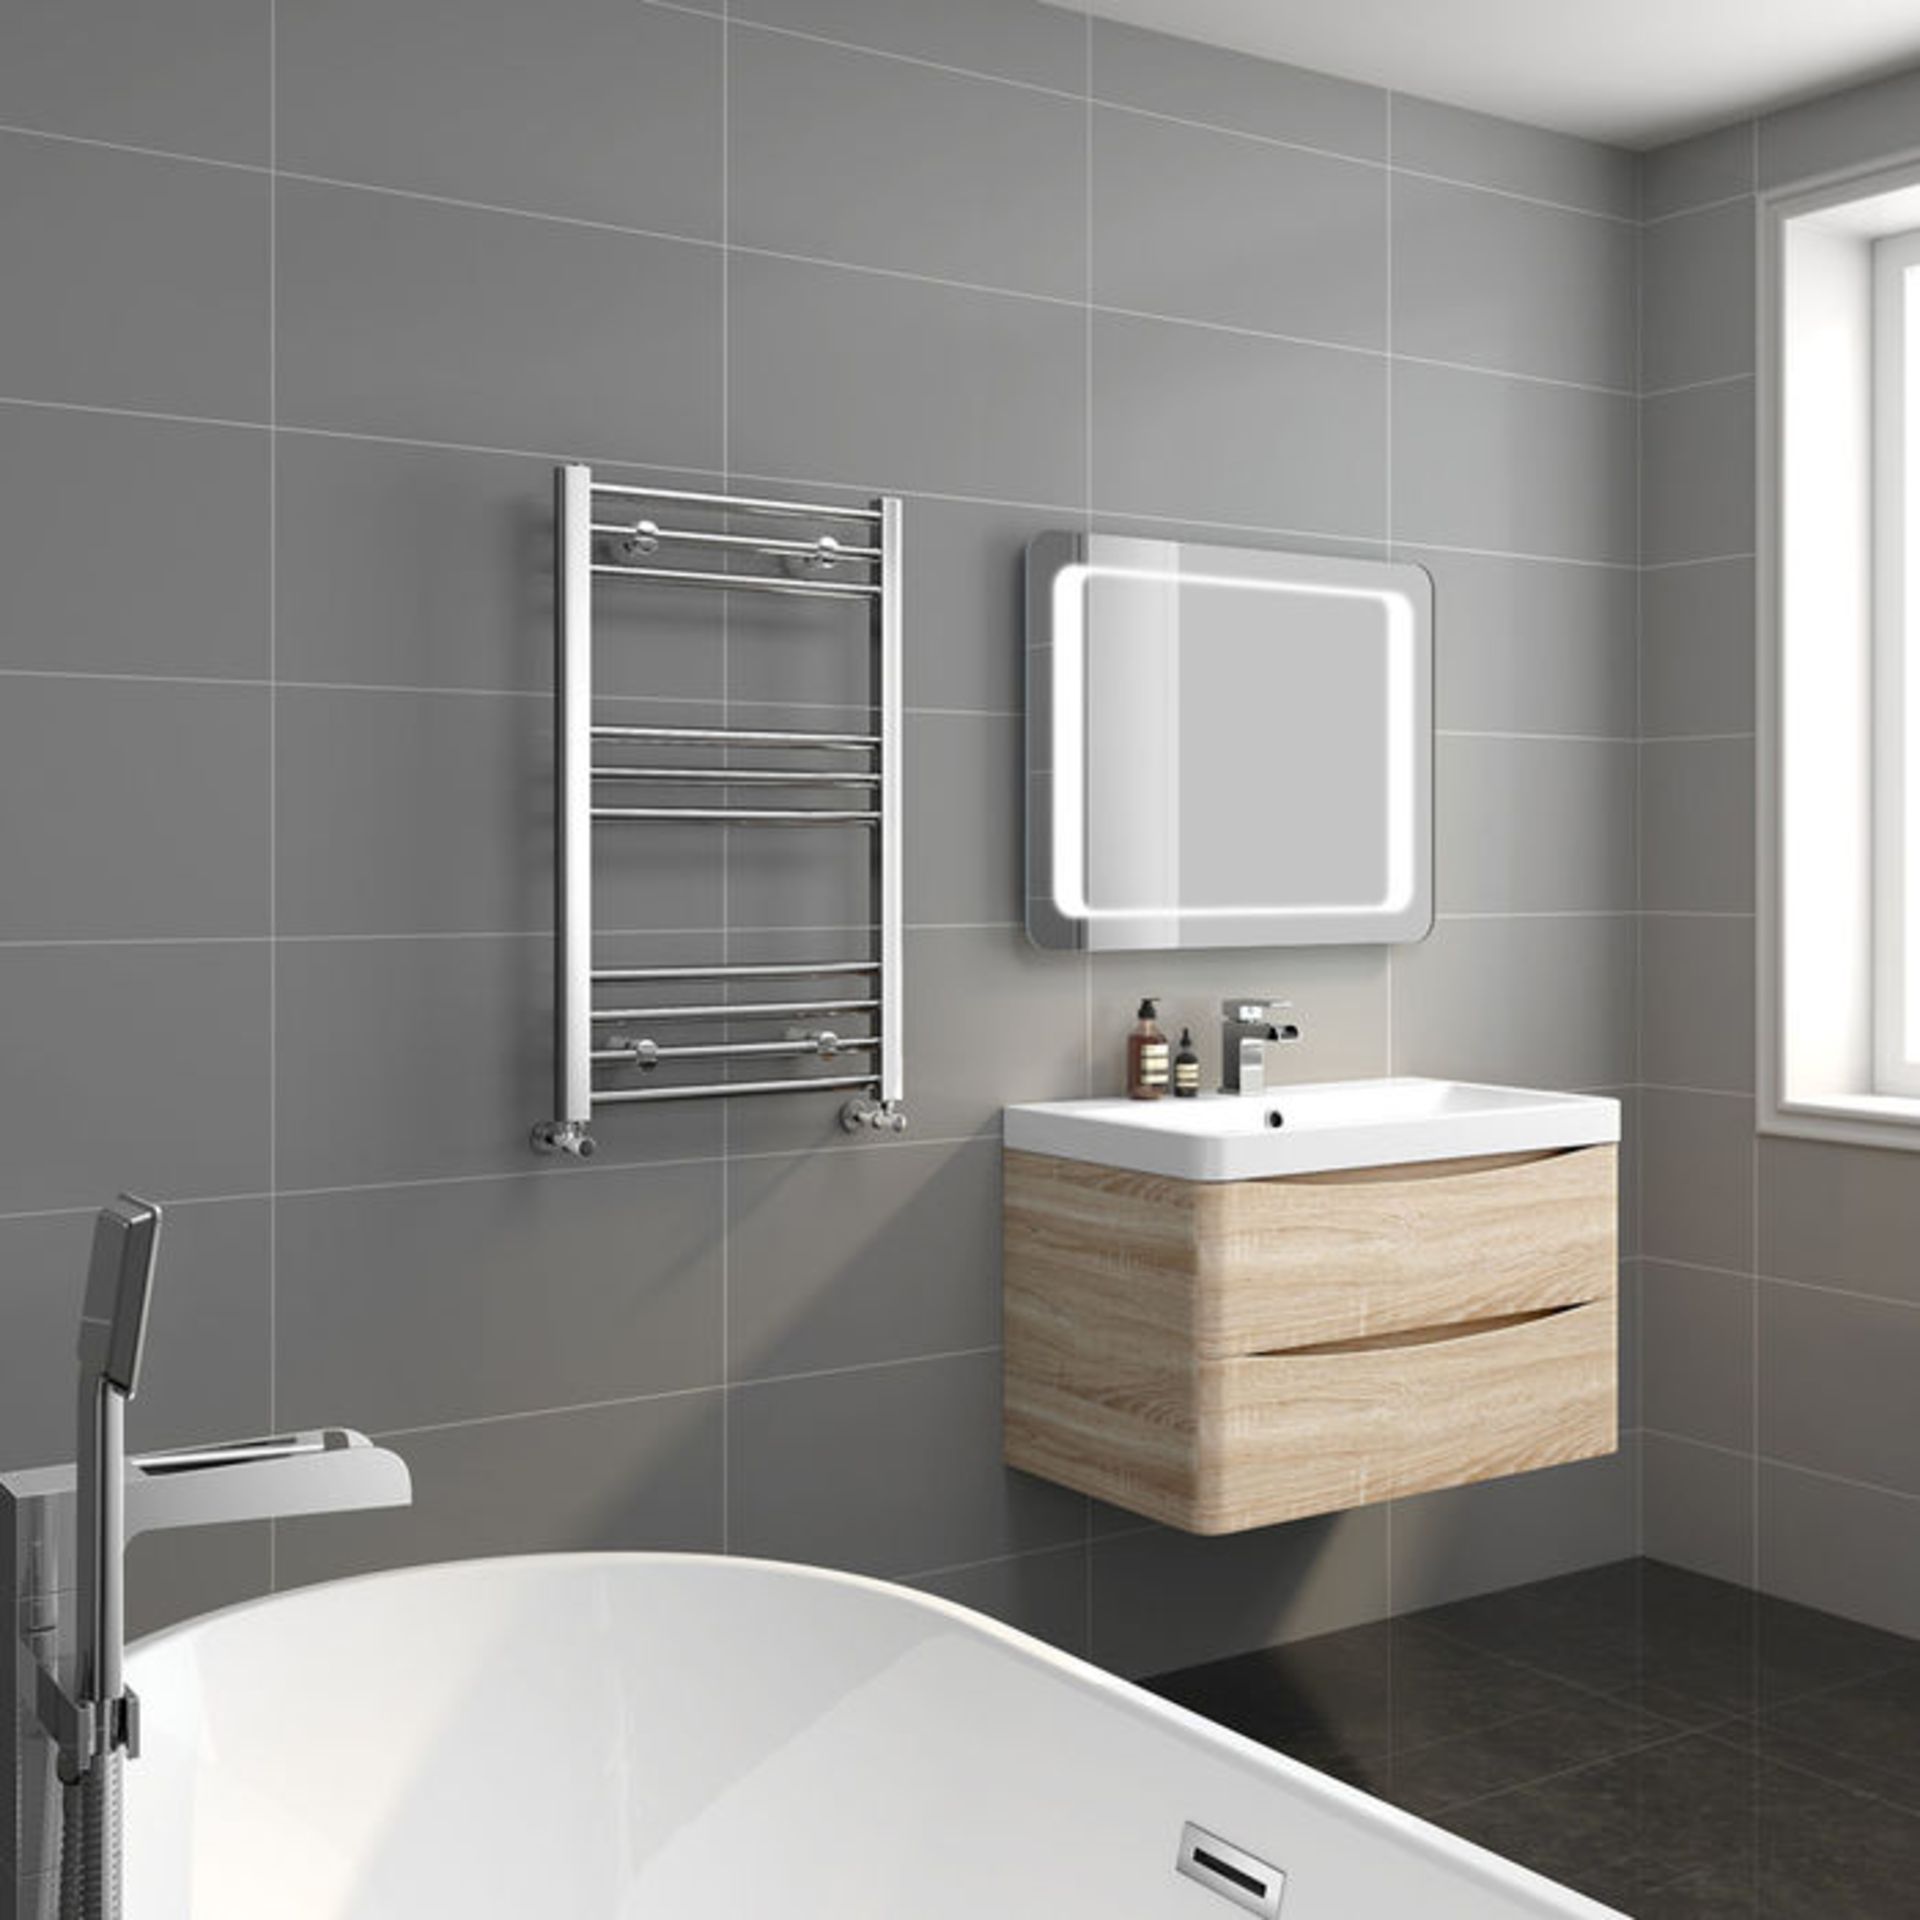 (G100) 800x500mm - 20mm Tubes - Chrome Heated Straight Rail Ladder Towel Radiator Low carbon steel - Image 2 of 3